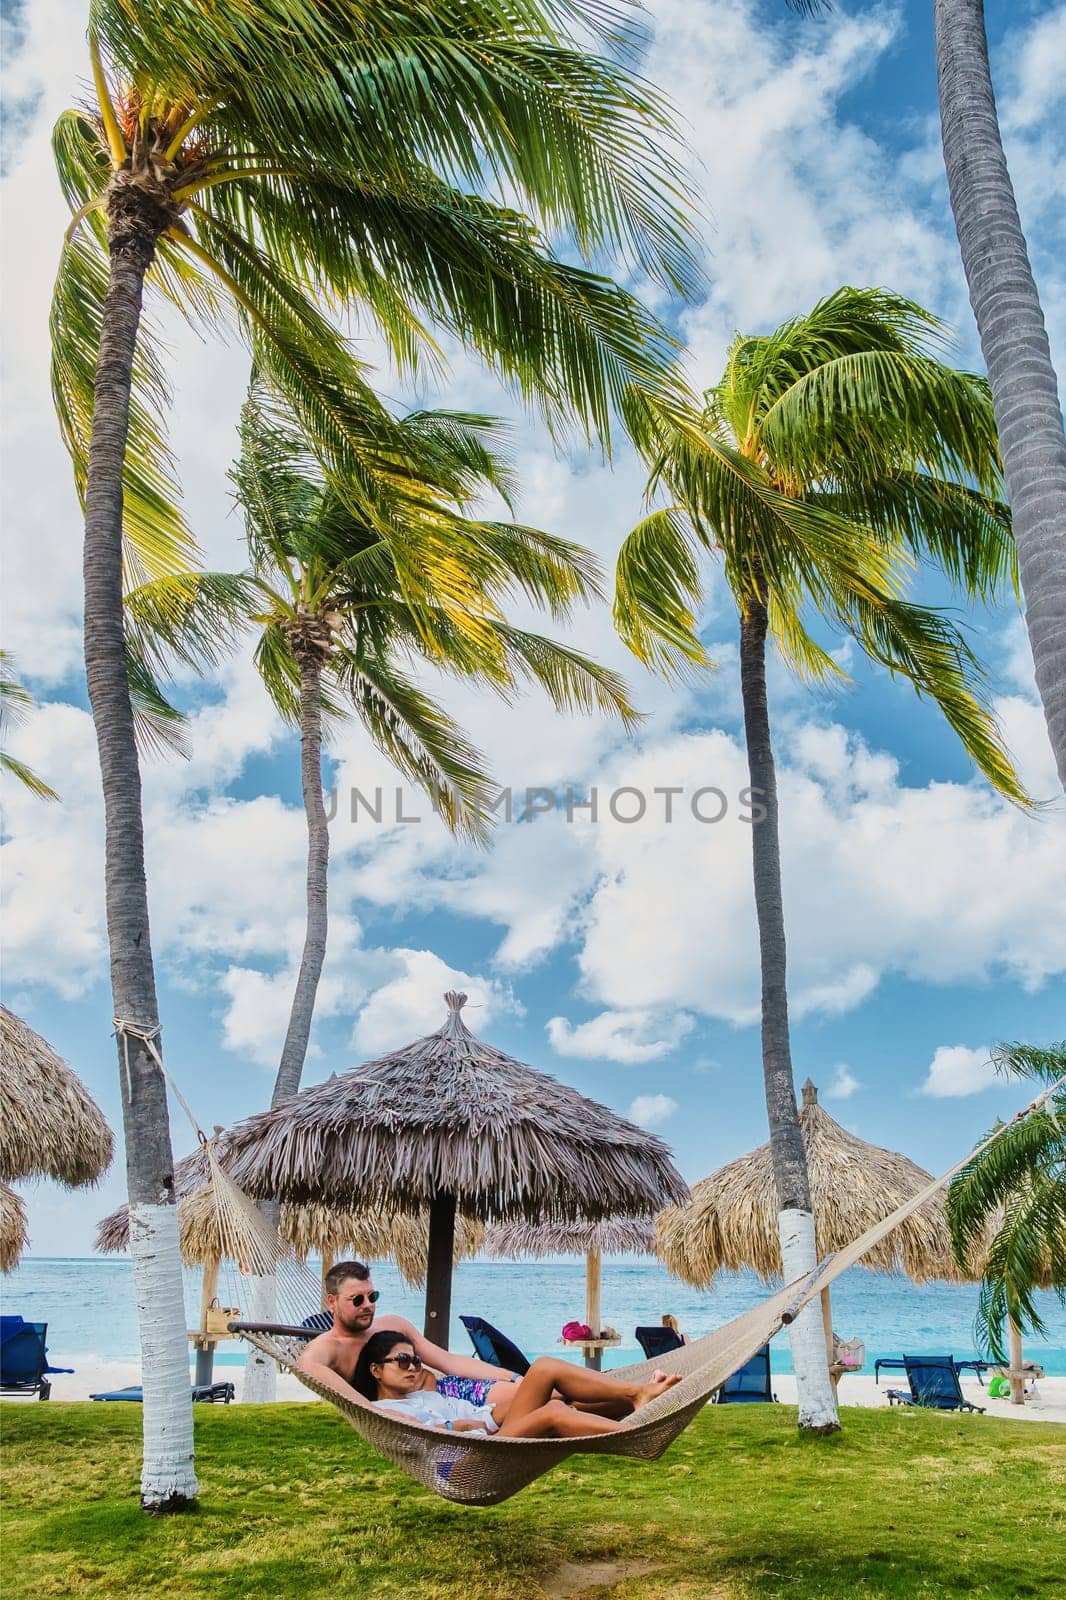 Palm Beach Aruba Caribbean, a couple of men and women in a hammock at a white long sandy beach with palm trees at Aruba Antilles during summer vacation holidays